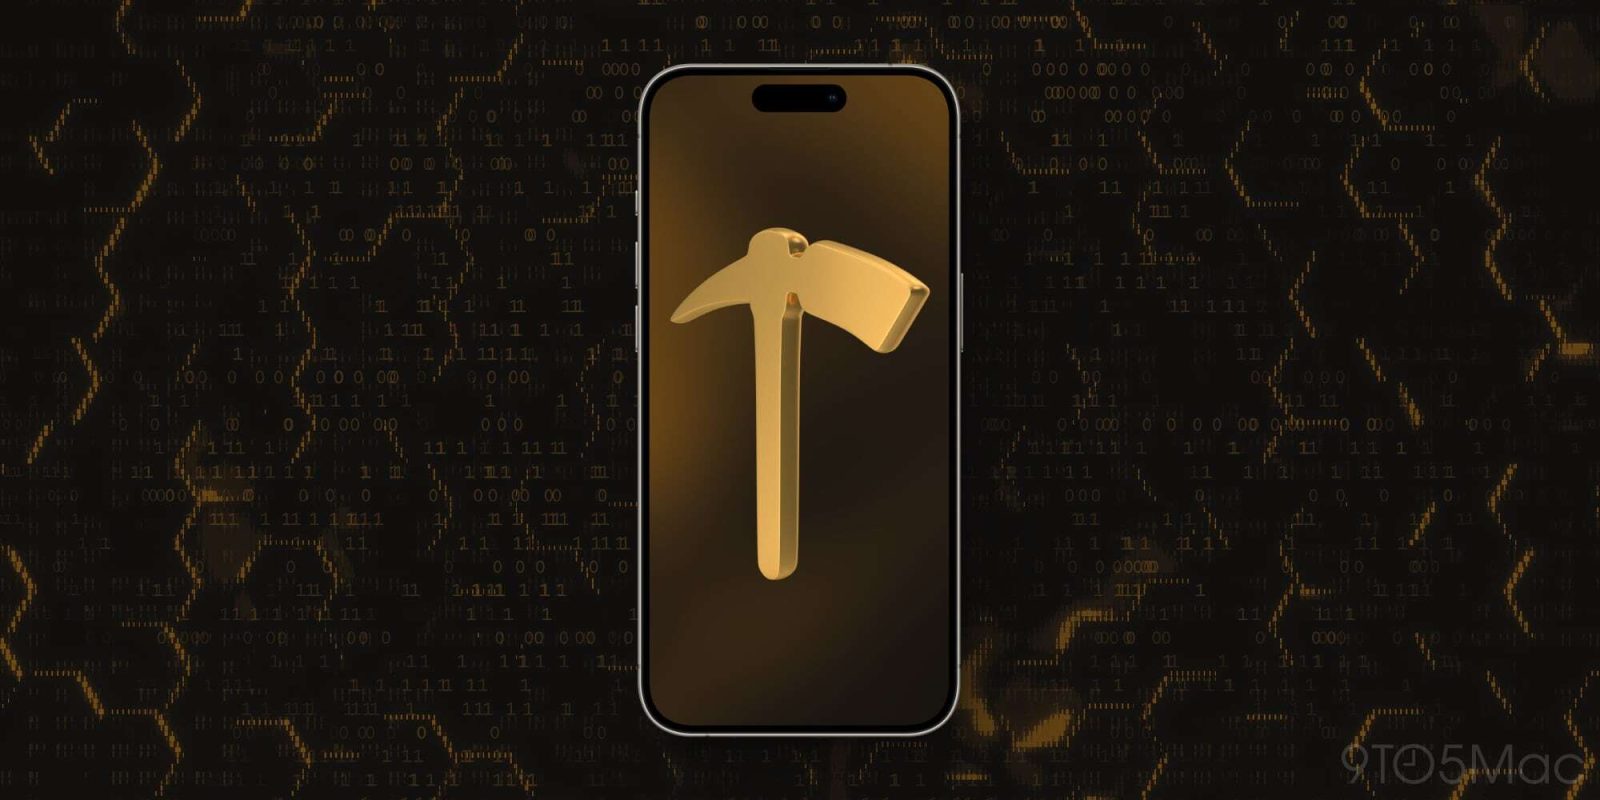 protect against iPhone trojan GoldPickaxe